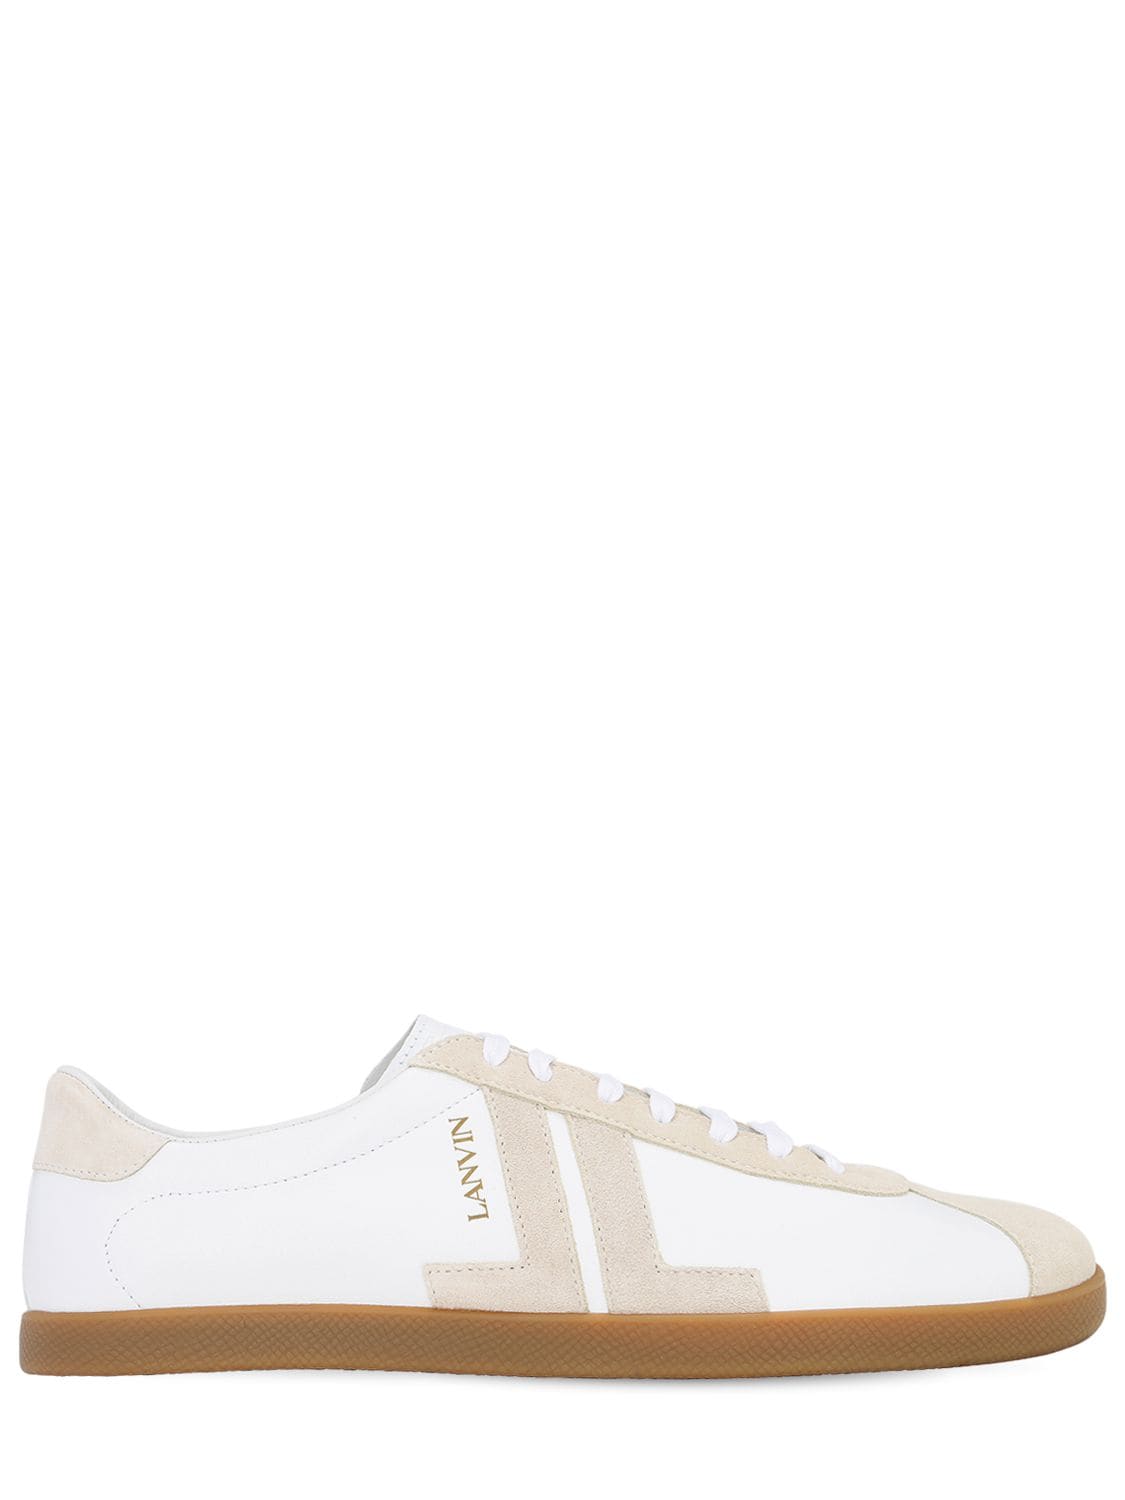 Lanvin Sneakers In White Suede And 